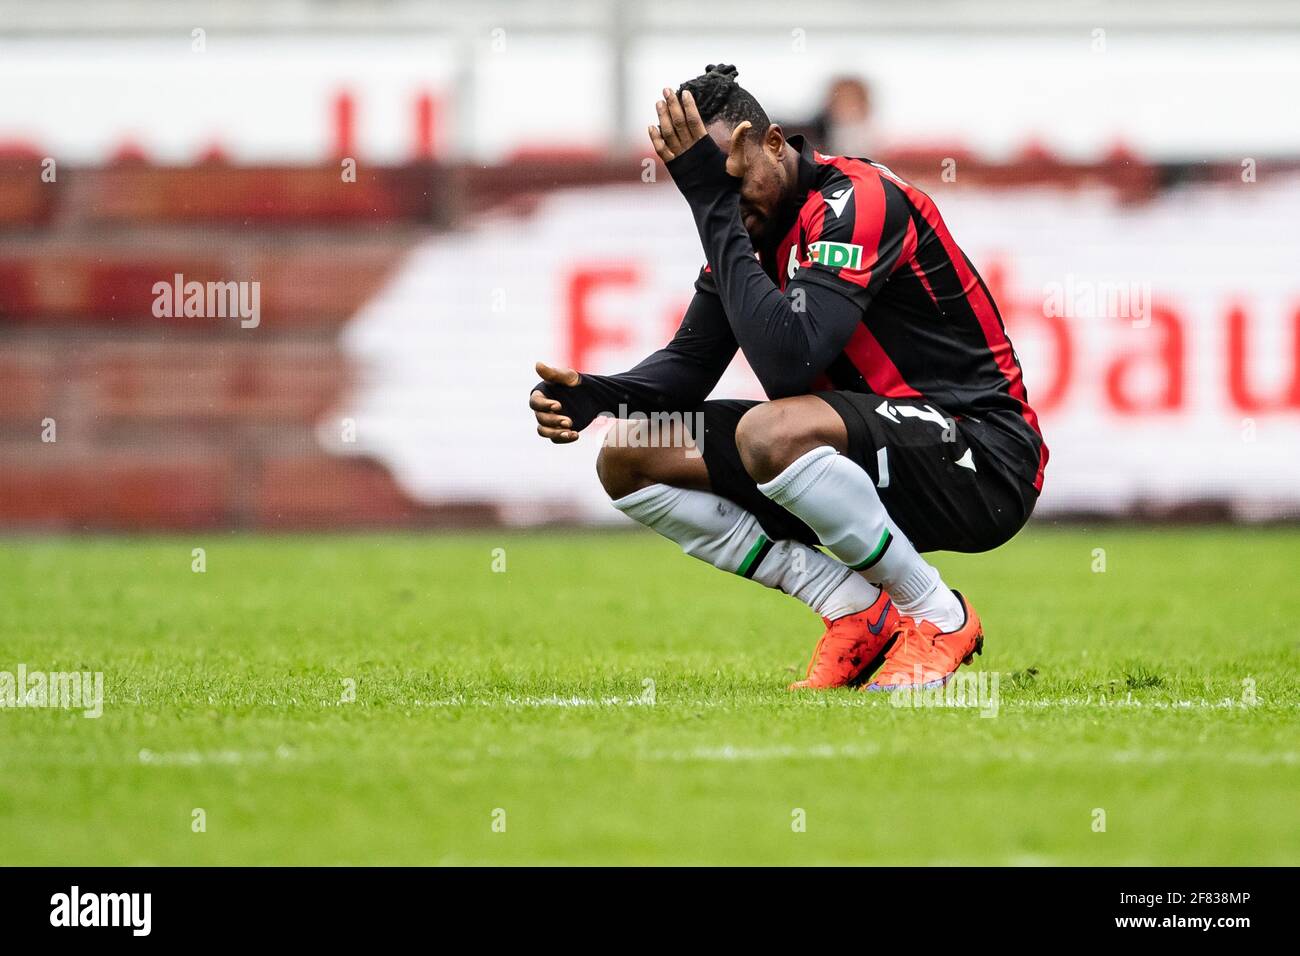 Hanover, Germany. 11th Apr, 2021. Football: 2. Bundesliga, Hannover 96 - 1.  FC Heidenheim, Matchday 28, at the HDI Arena. Hannover's Patrick Twumasi  gestures after the final whistle. Credit: Swen Pförtner/dpa -